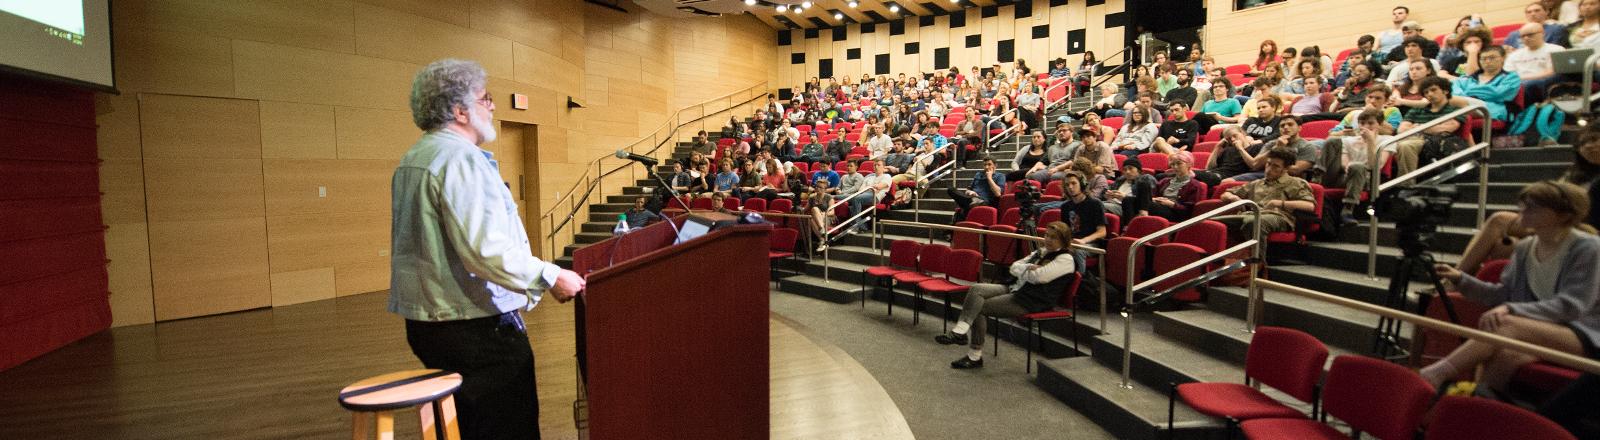 Loyola professor giving a lecture to students in Nunemaker hall